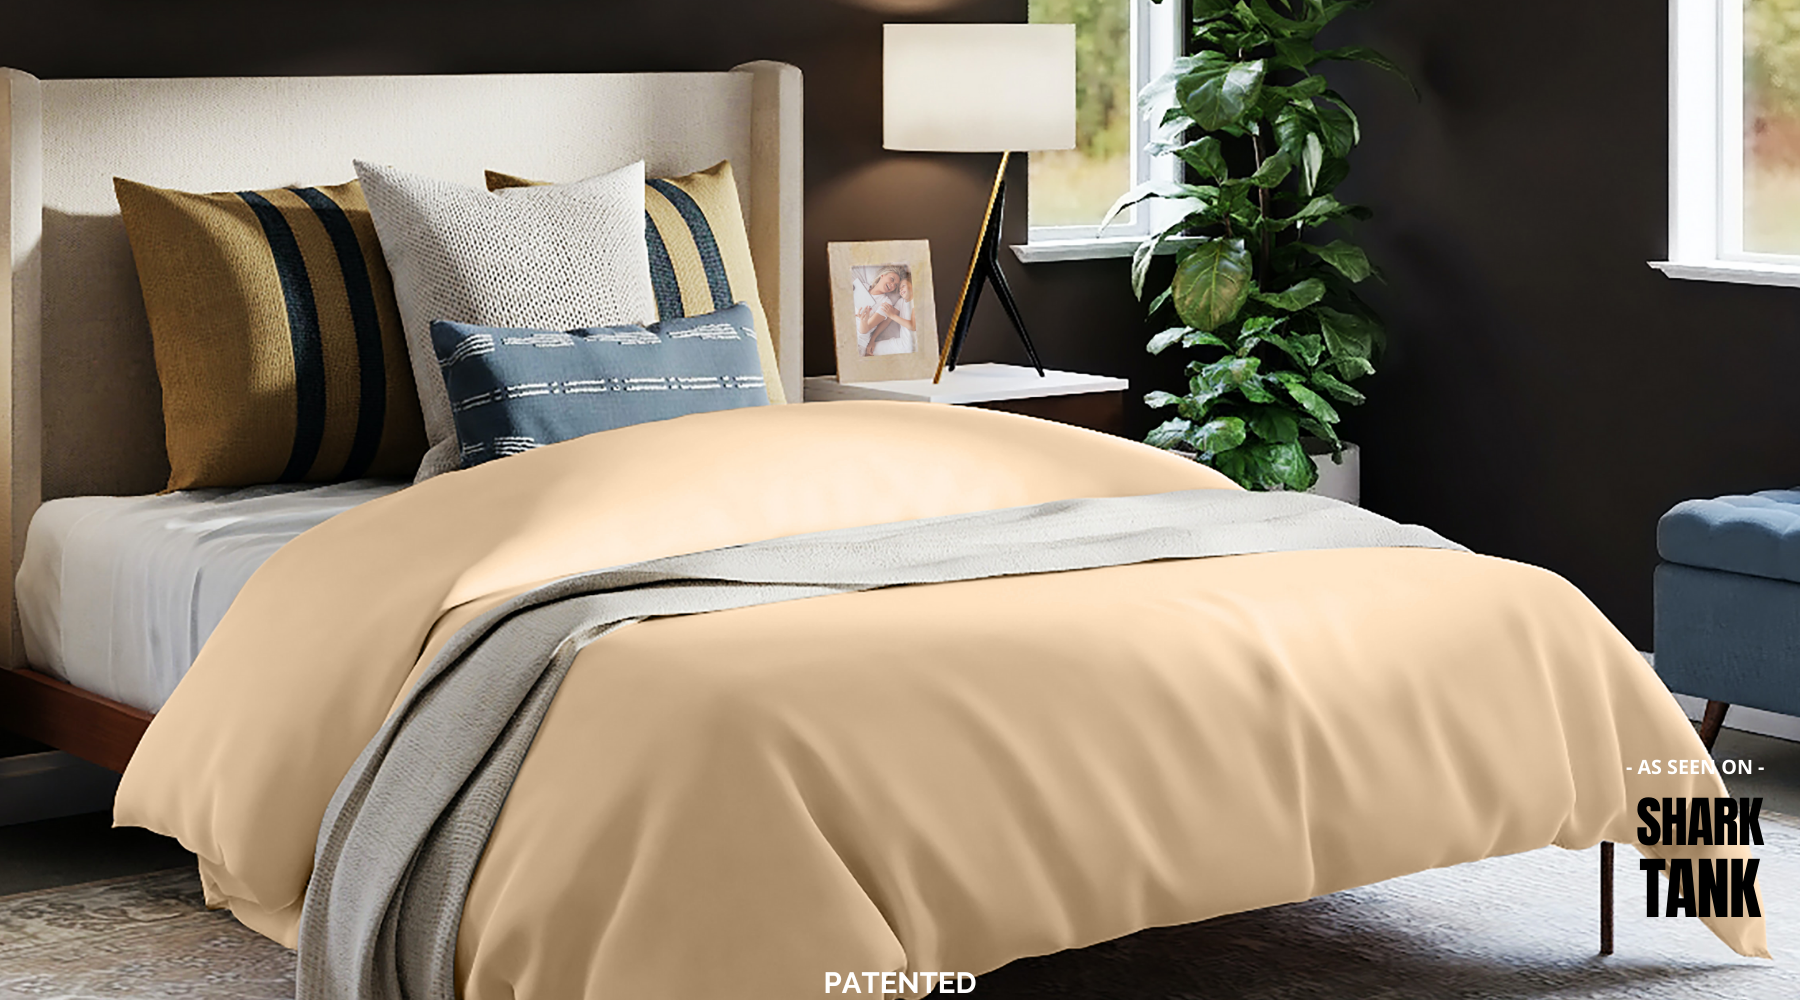 Luxury duvet cover - Easy to Change - featured on SHARK TANK!